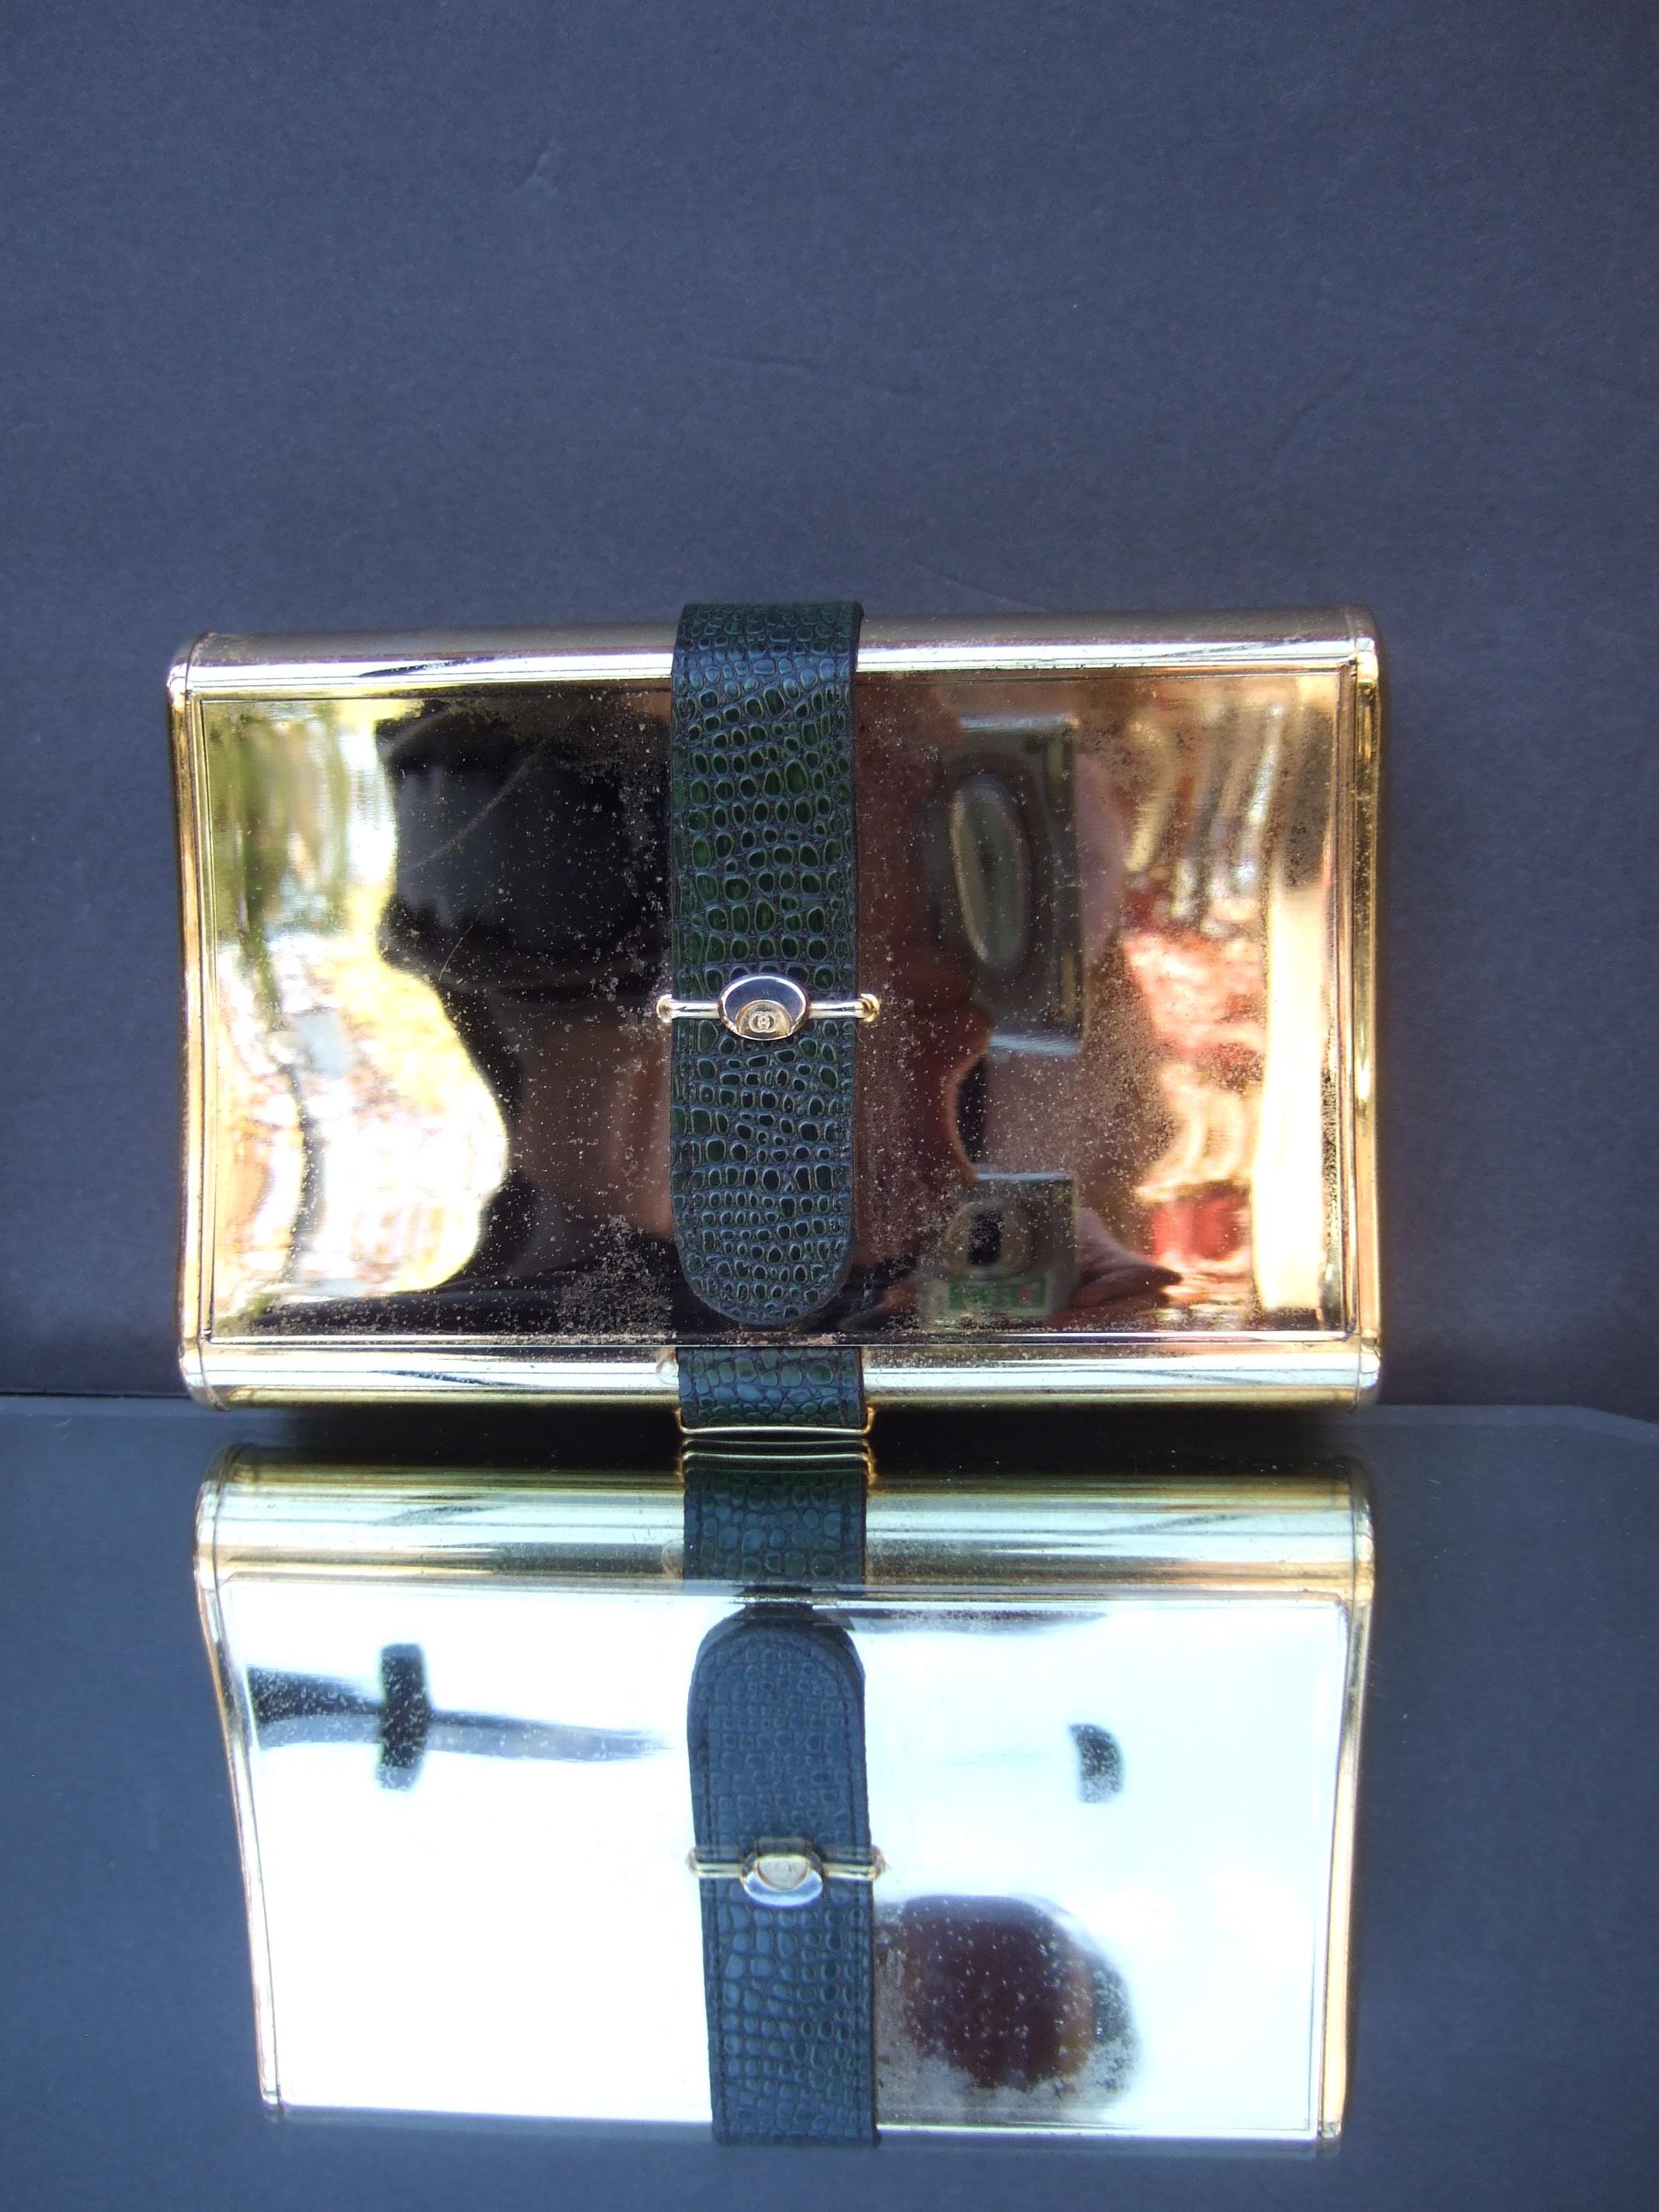 Gucci Italy Rare opulent gold plated minaudiere' clutch c 1970s
The elegant gold metal clutch is designed with a green leather embossed band 
that runs vertically across the center of the hinged lid cover & extends to the back exterior

Gucci's